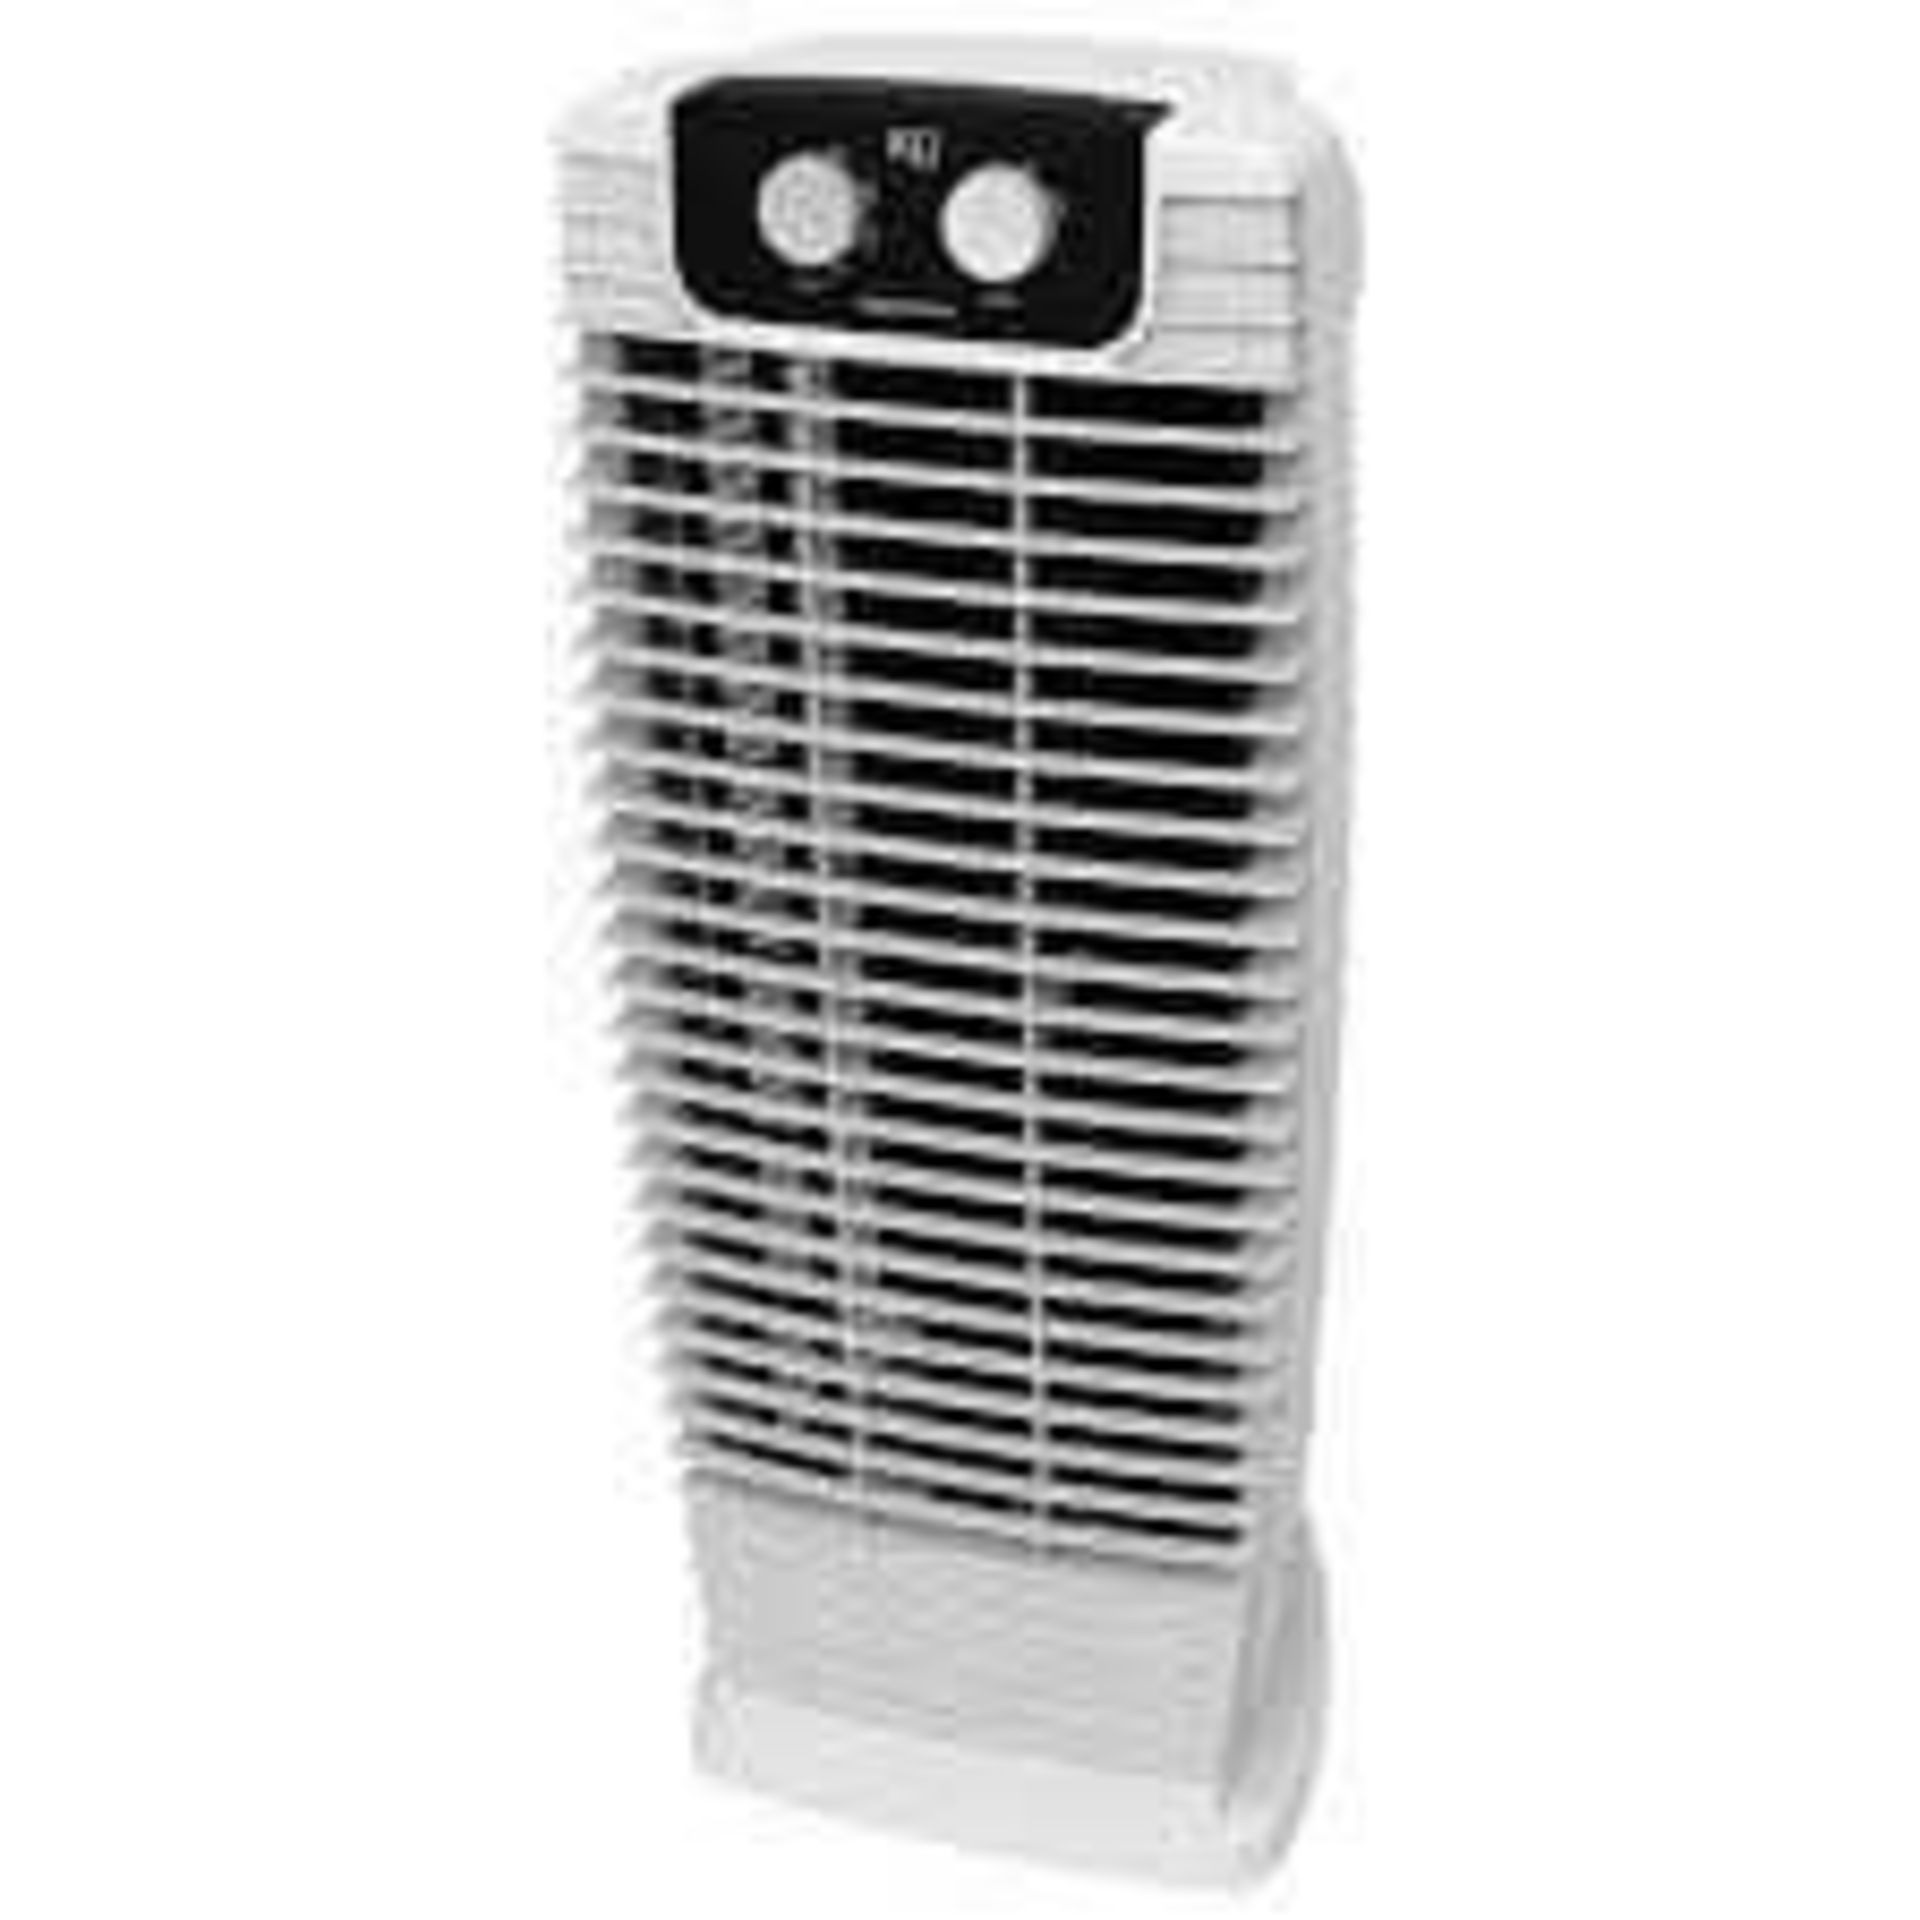 RRP £75 Boxed Brand New Kg Masterflow Tower Fan (Appraisals Available On Request) (Pictures For